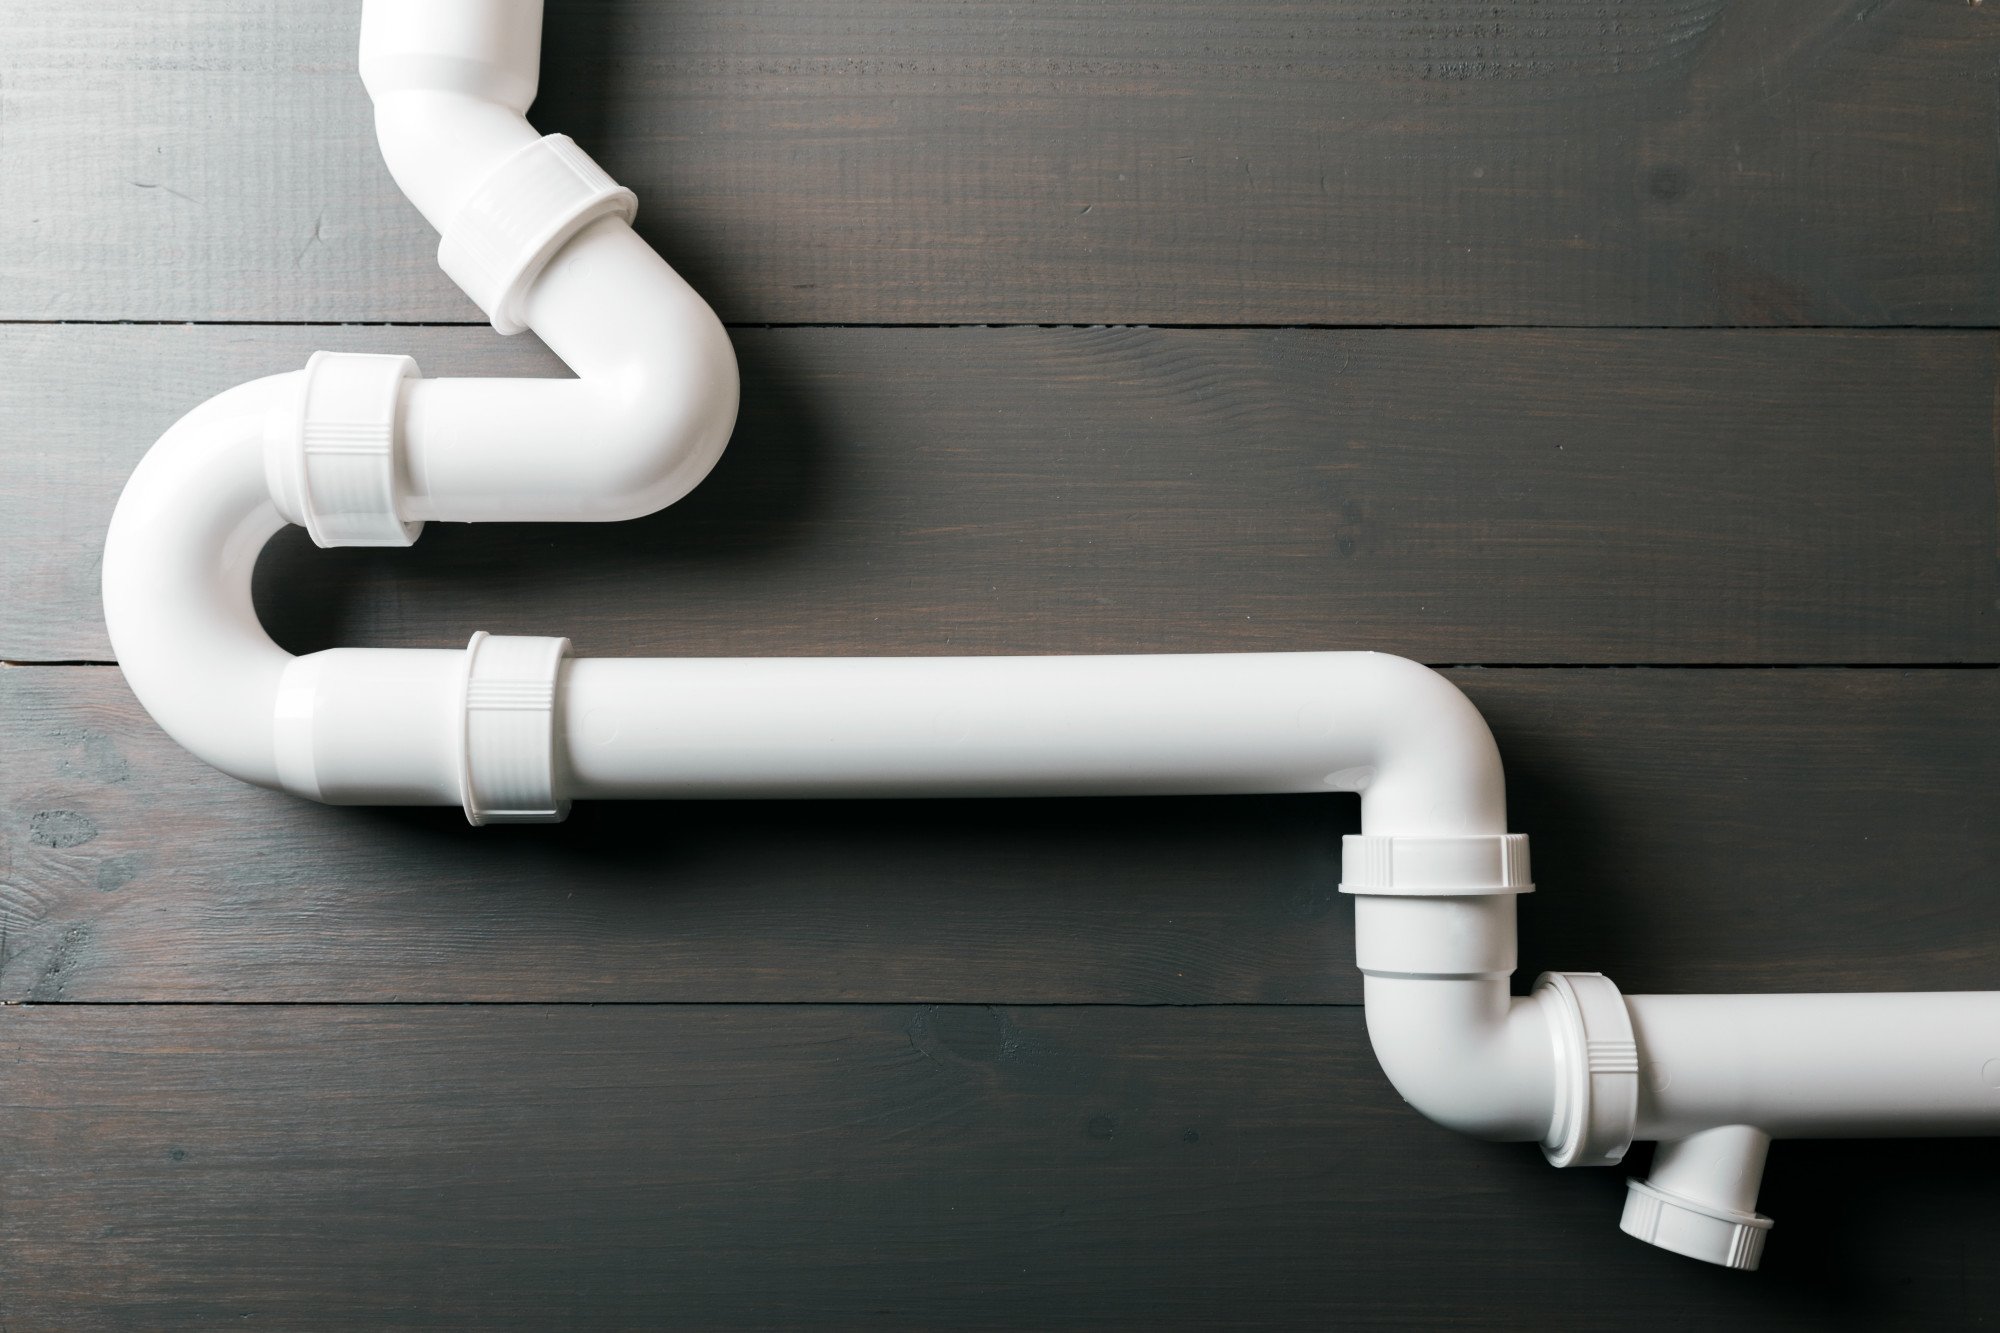 Common Winter Plumbing Problems and How to Address Them in Stillwater, OK